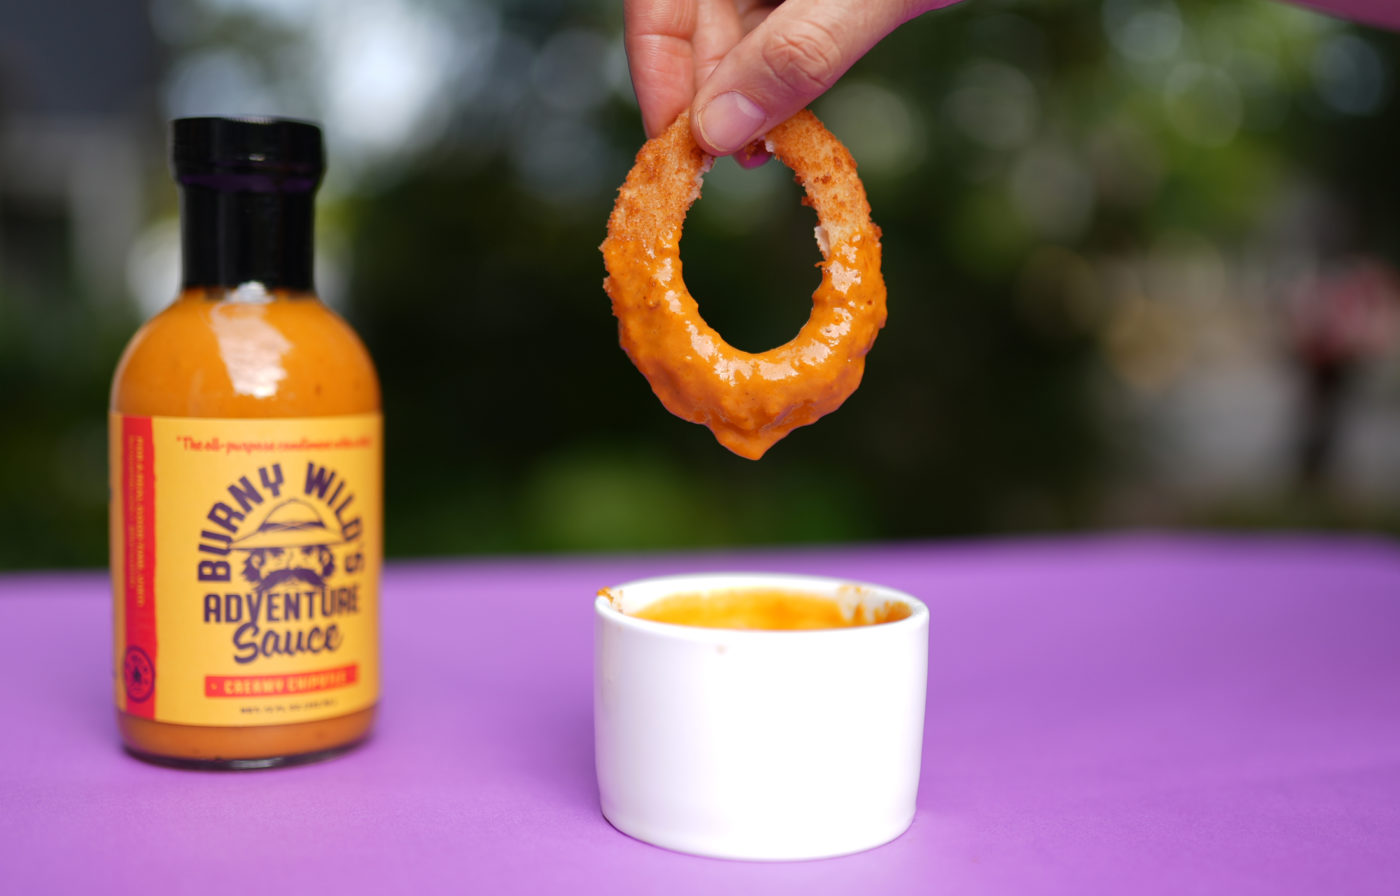 Crispy Onion Ring Dipped in Burny Wild's Adventure Sauce. More versatile than any hot sauce. Bottled in Raleigh, NC.